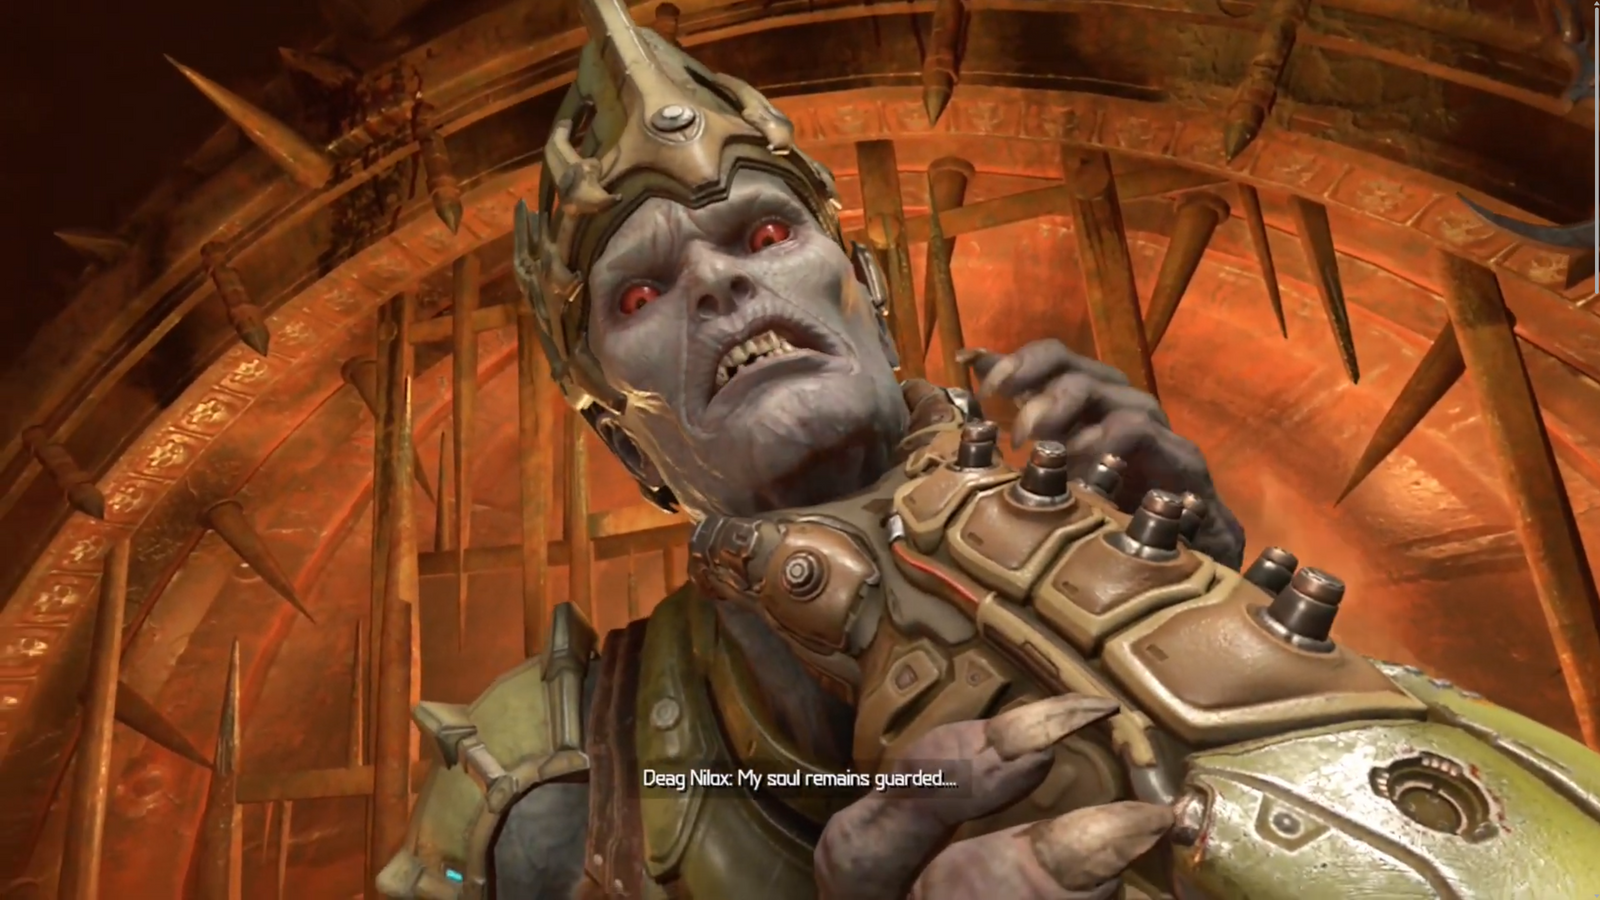 doom eternal doomslayer holding hell priest by the neck